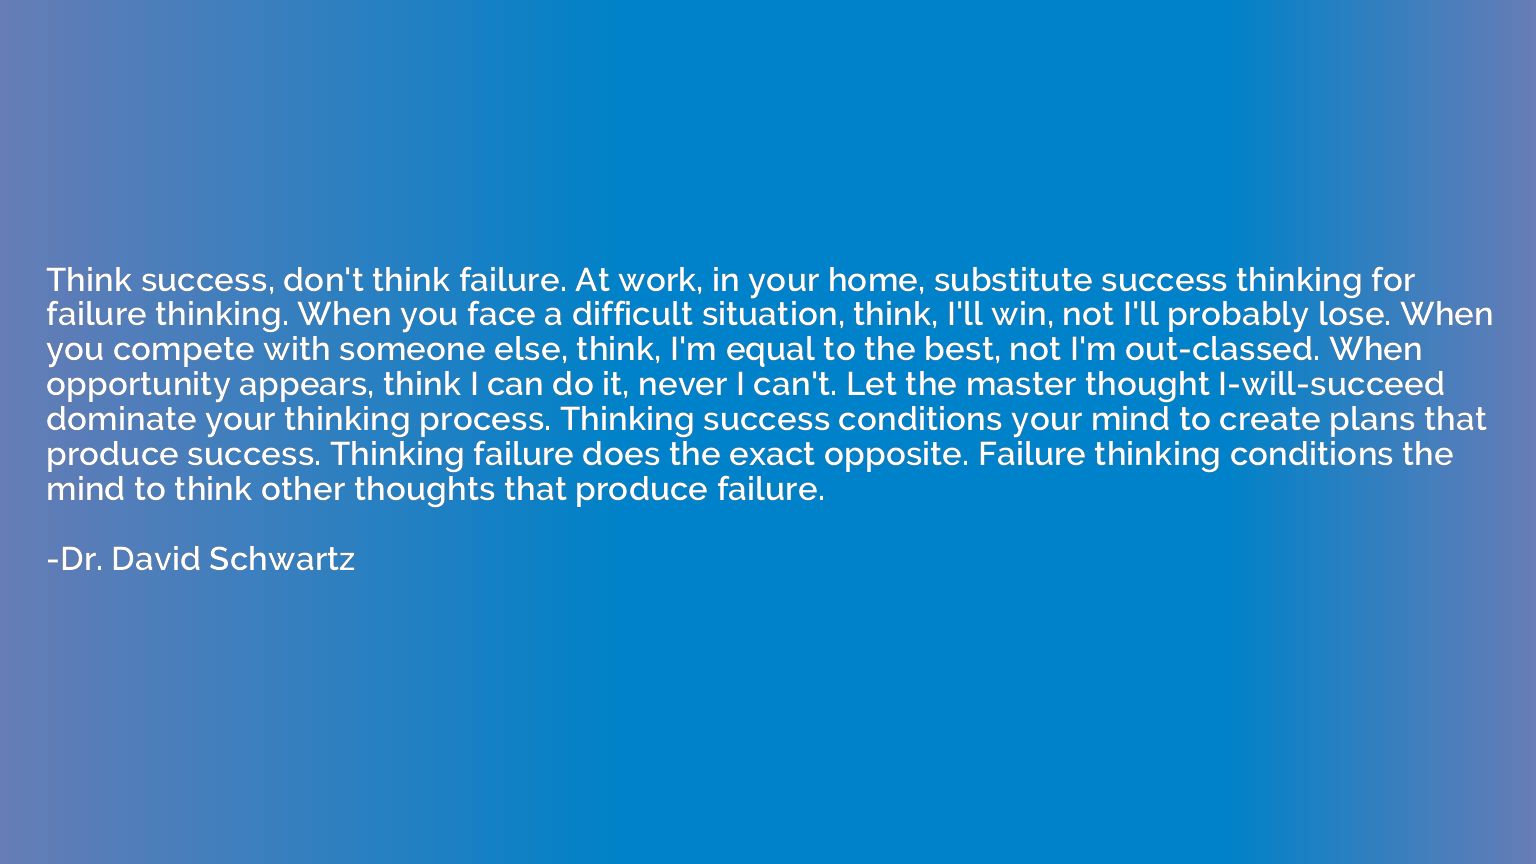 Think success, don't think failure. At work, in your home, s